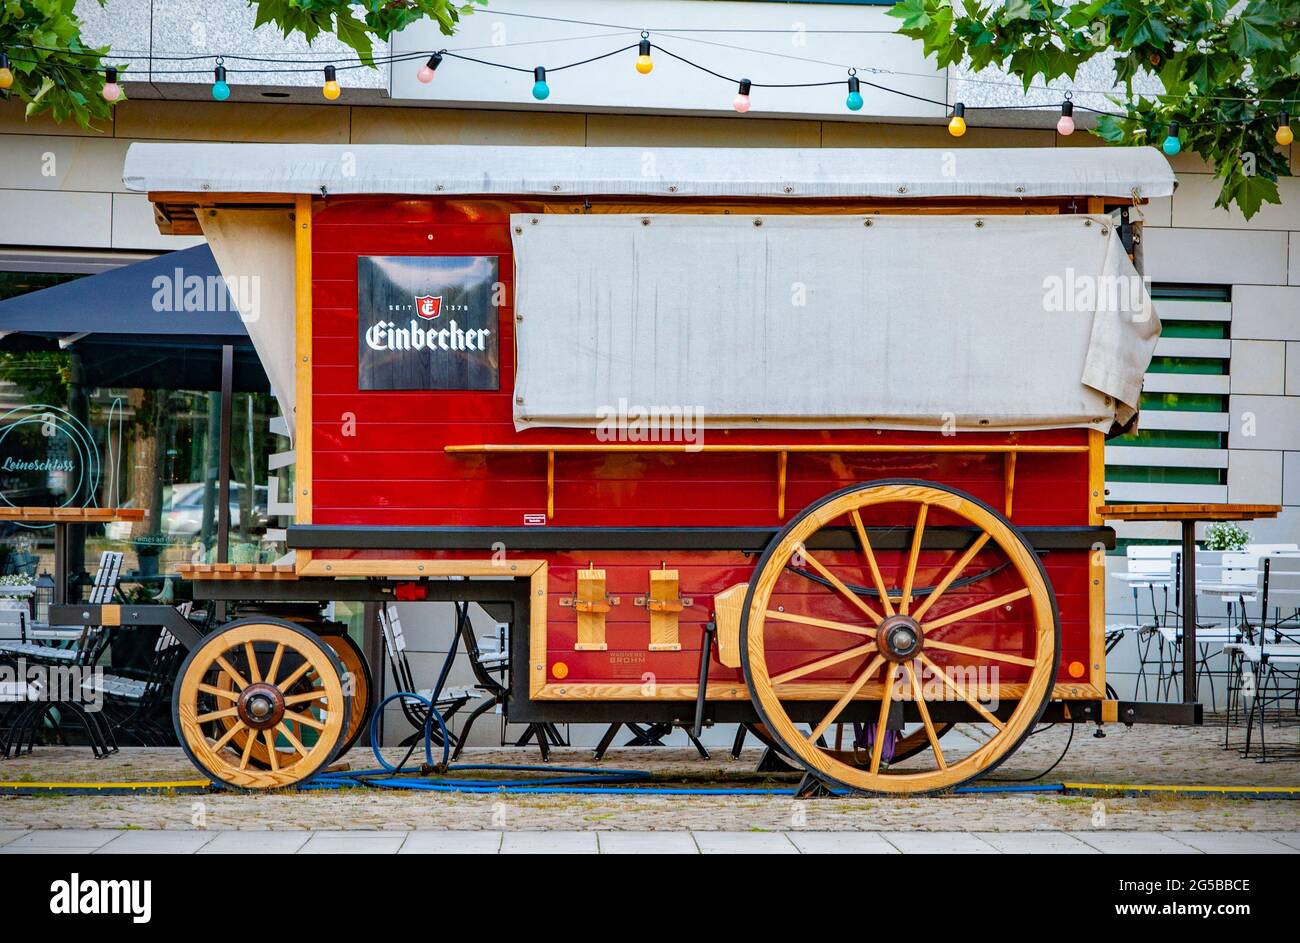 HANNOVER, GERMANY. JUNE 19, 2021. Advertizing Vintage Carriage with Einbecker Beer Logotype. European tradition. Stock Photo